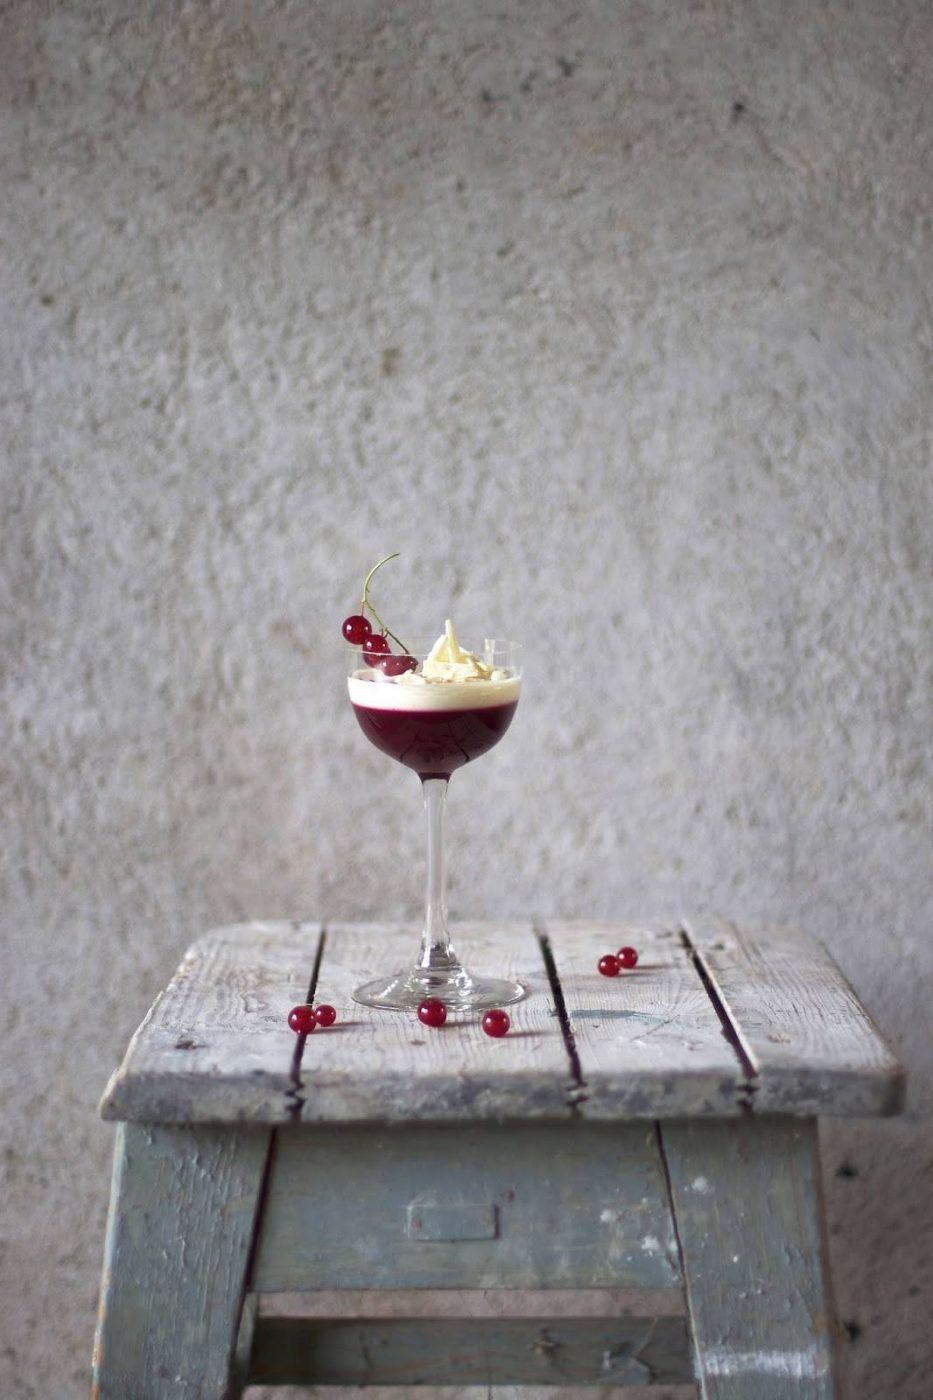 Image for Coconut-Panna-Cotta with Currant-Jelly & White Chocolate Flakes